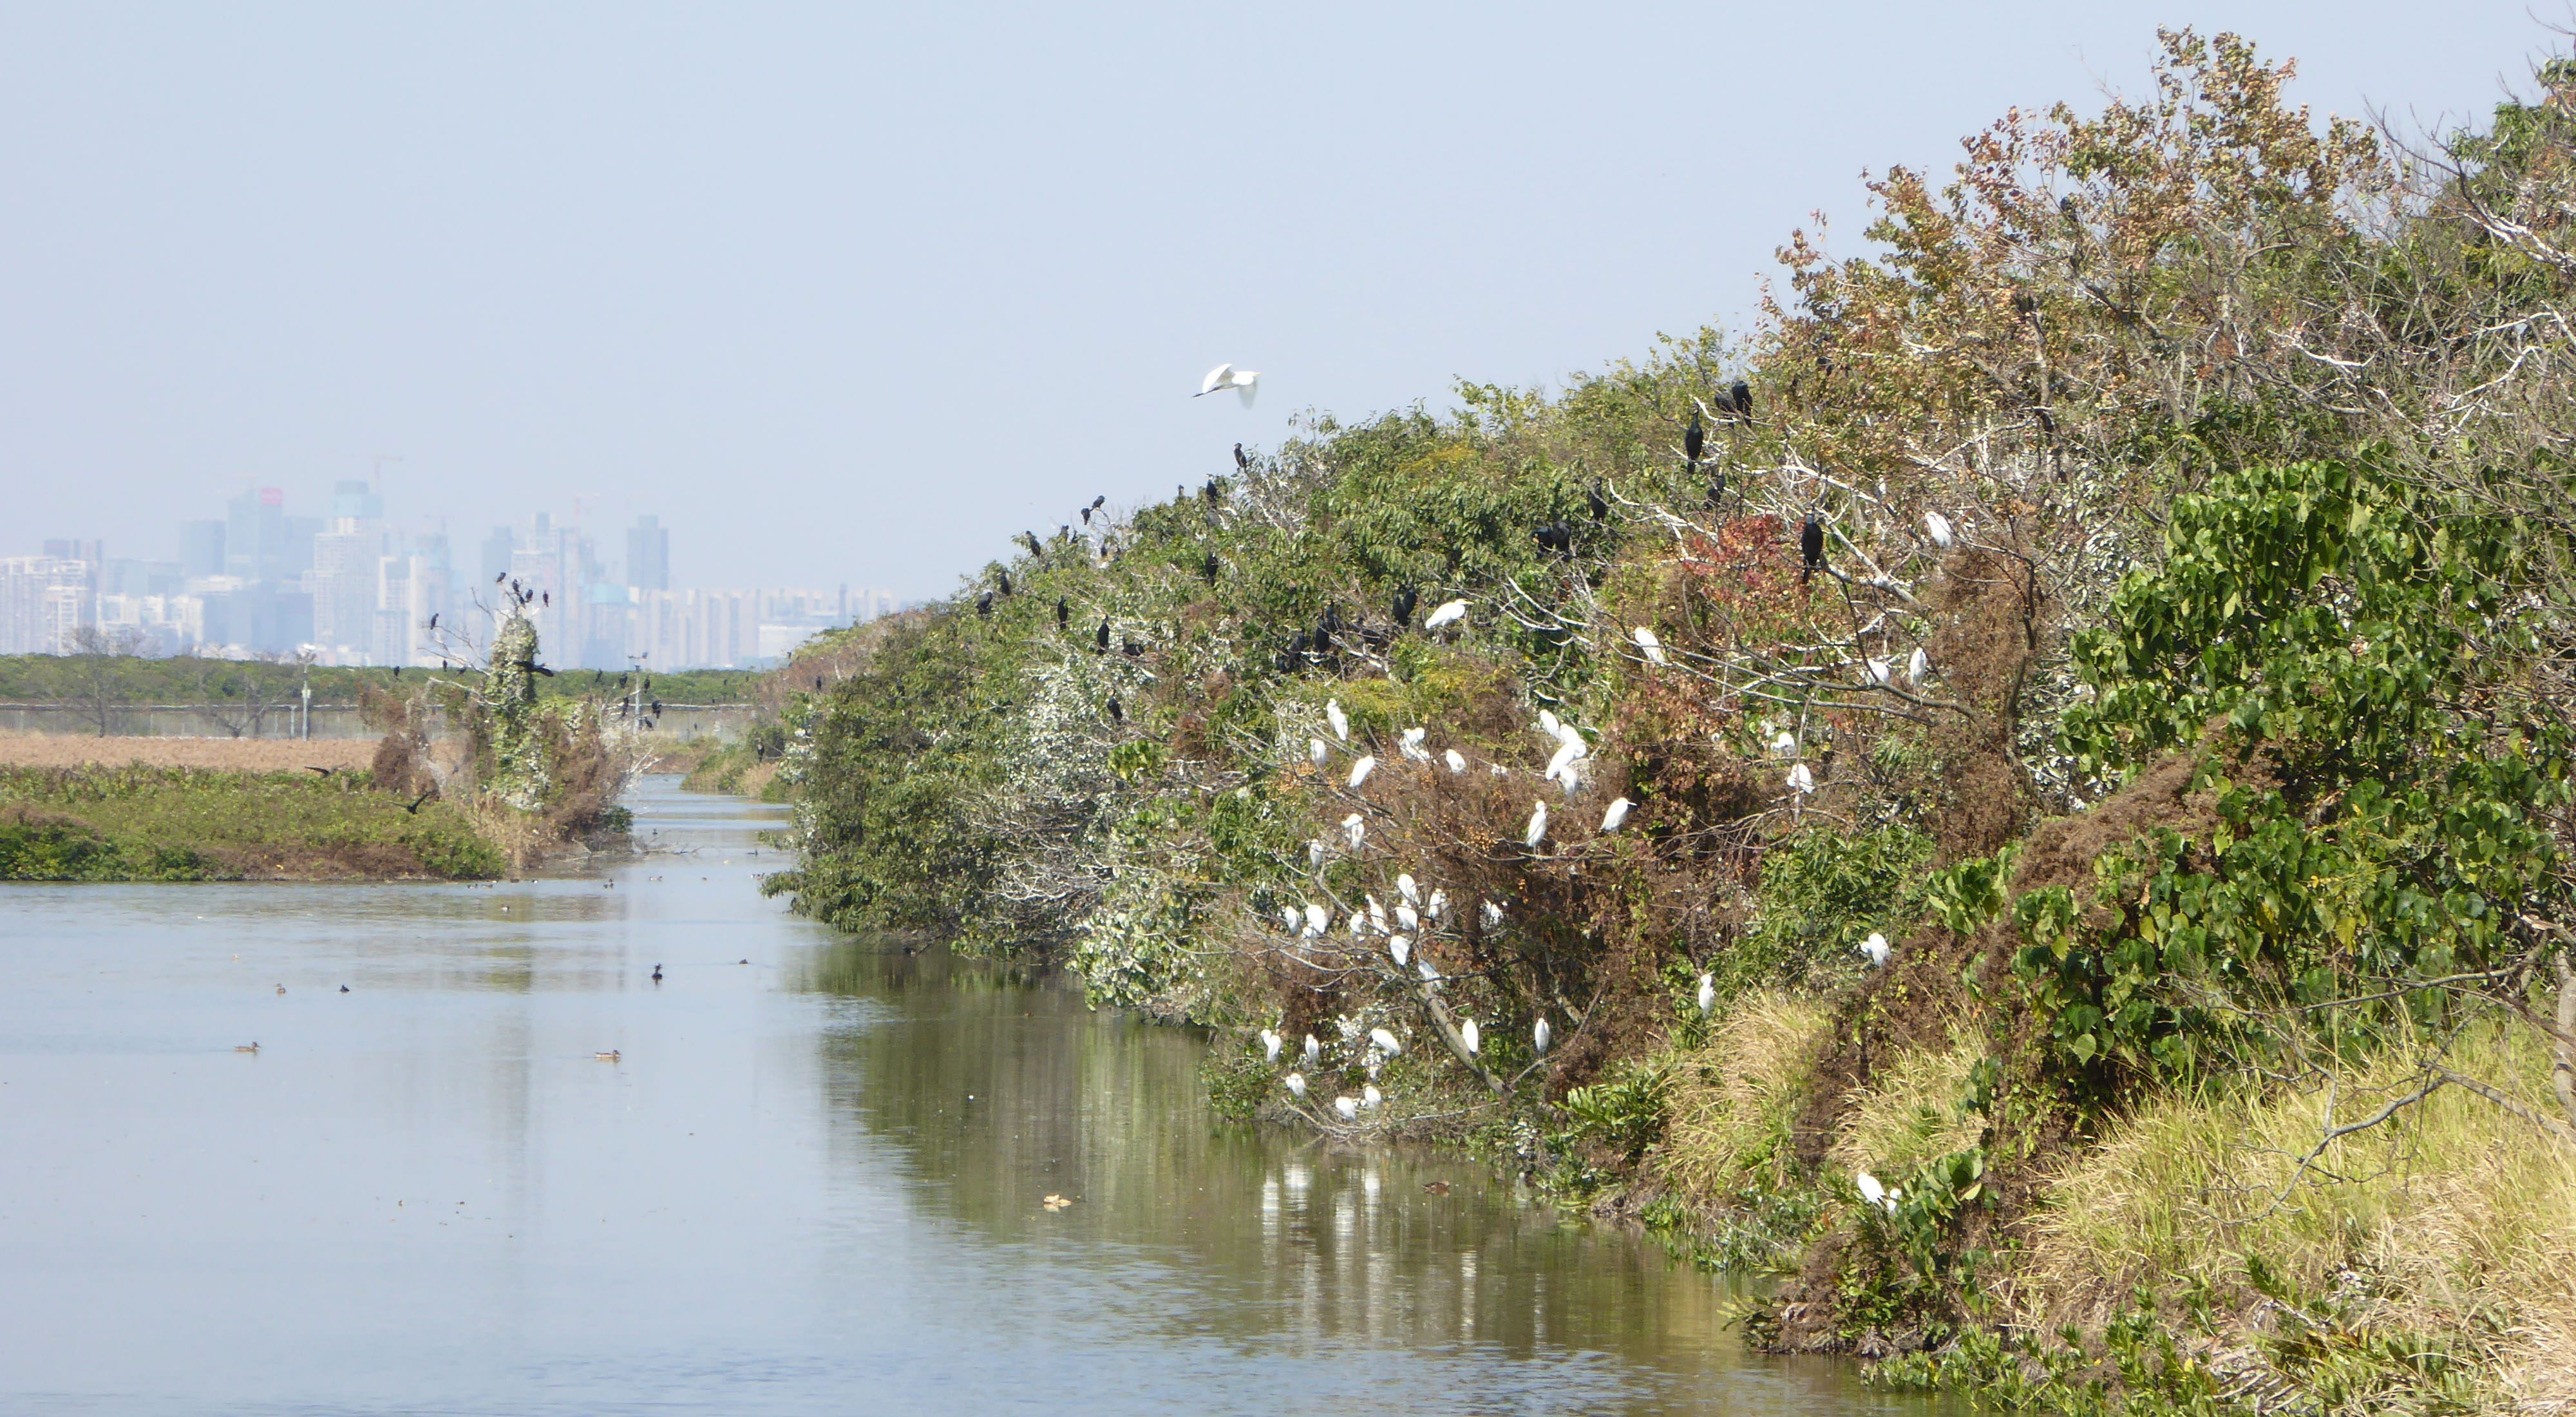 Bushes with birds over water are seen with a large city in the background.